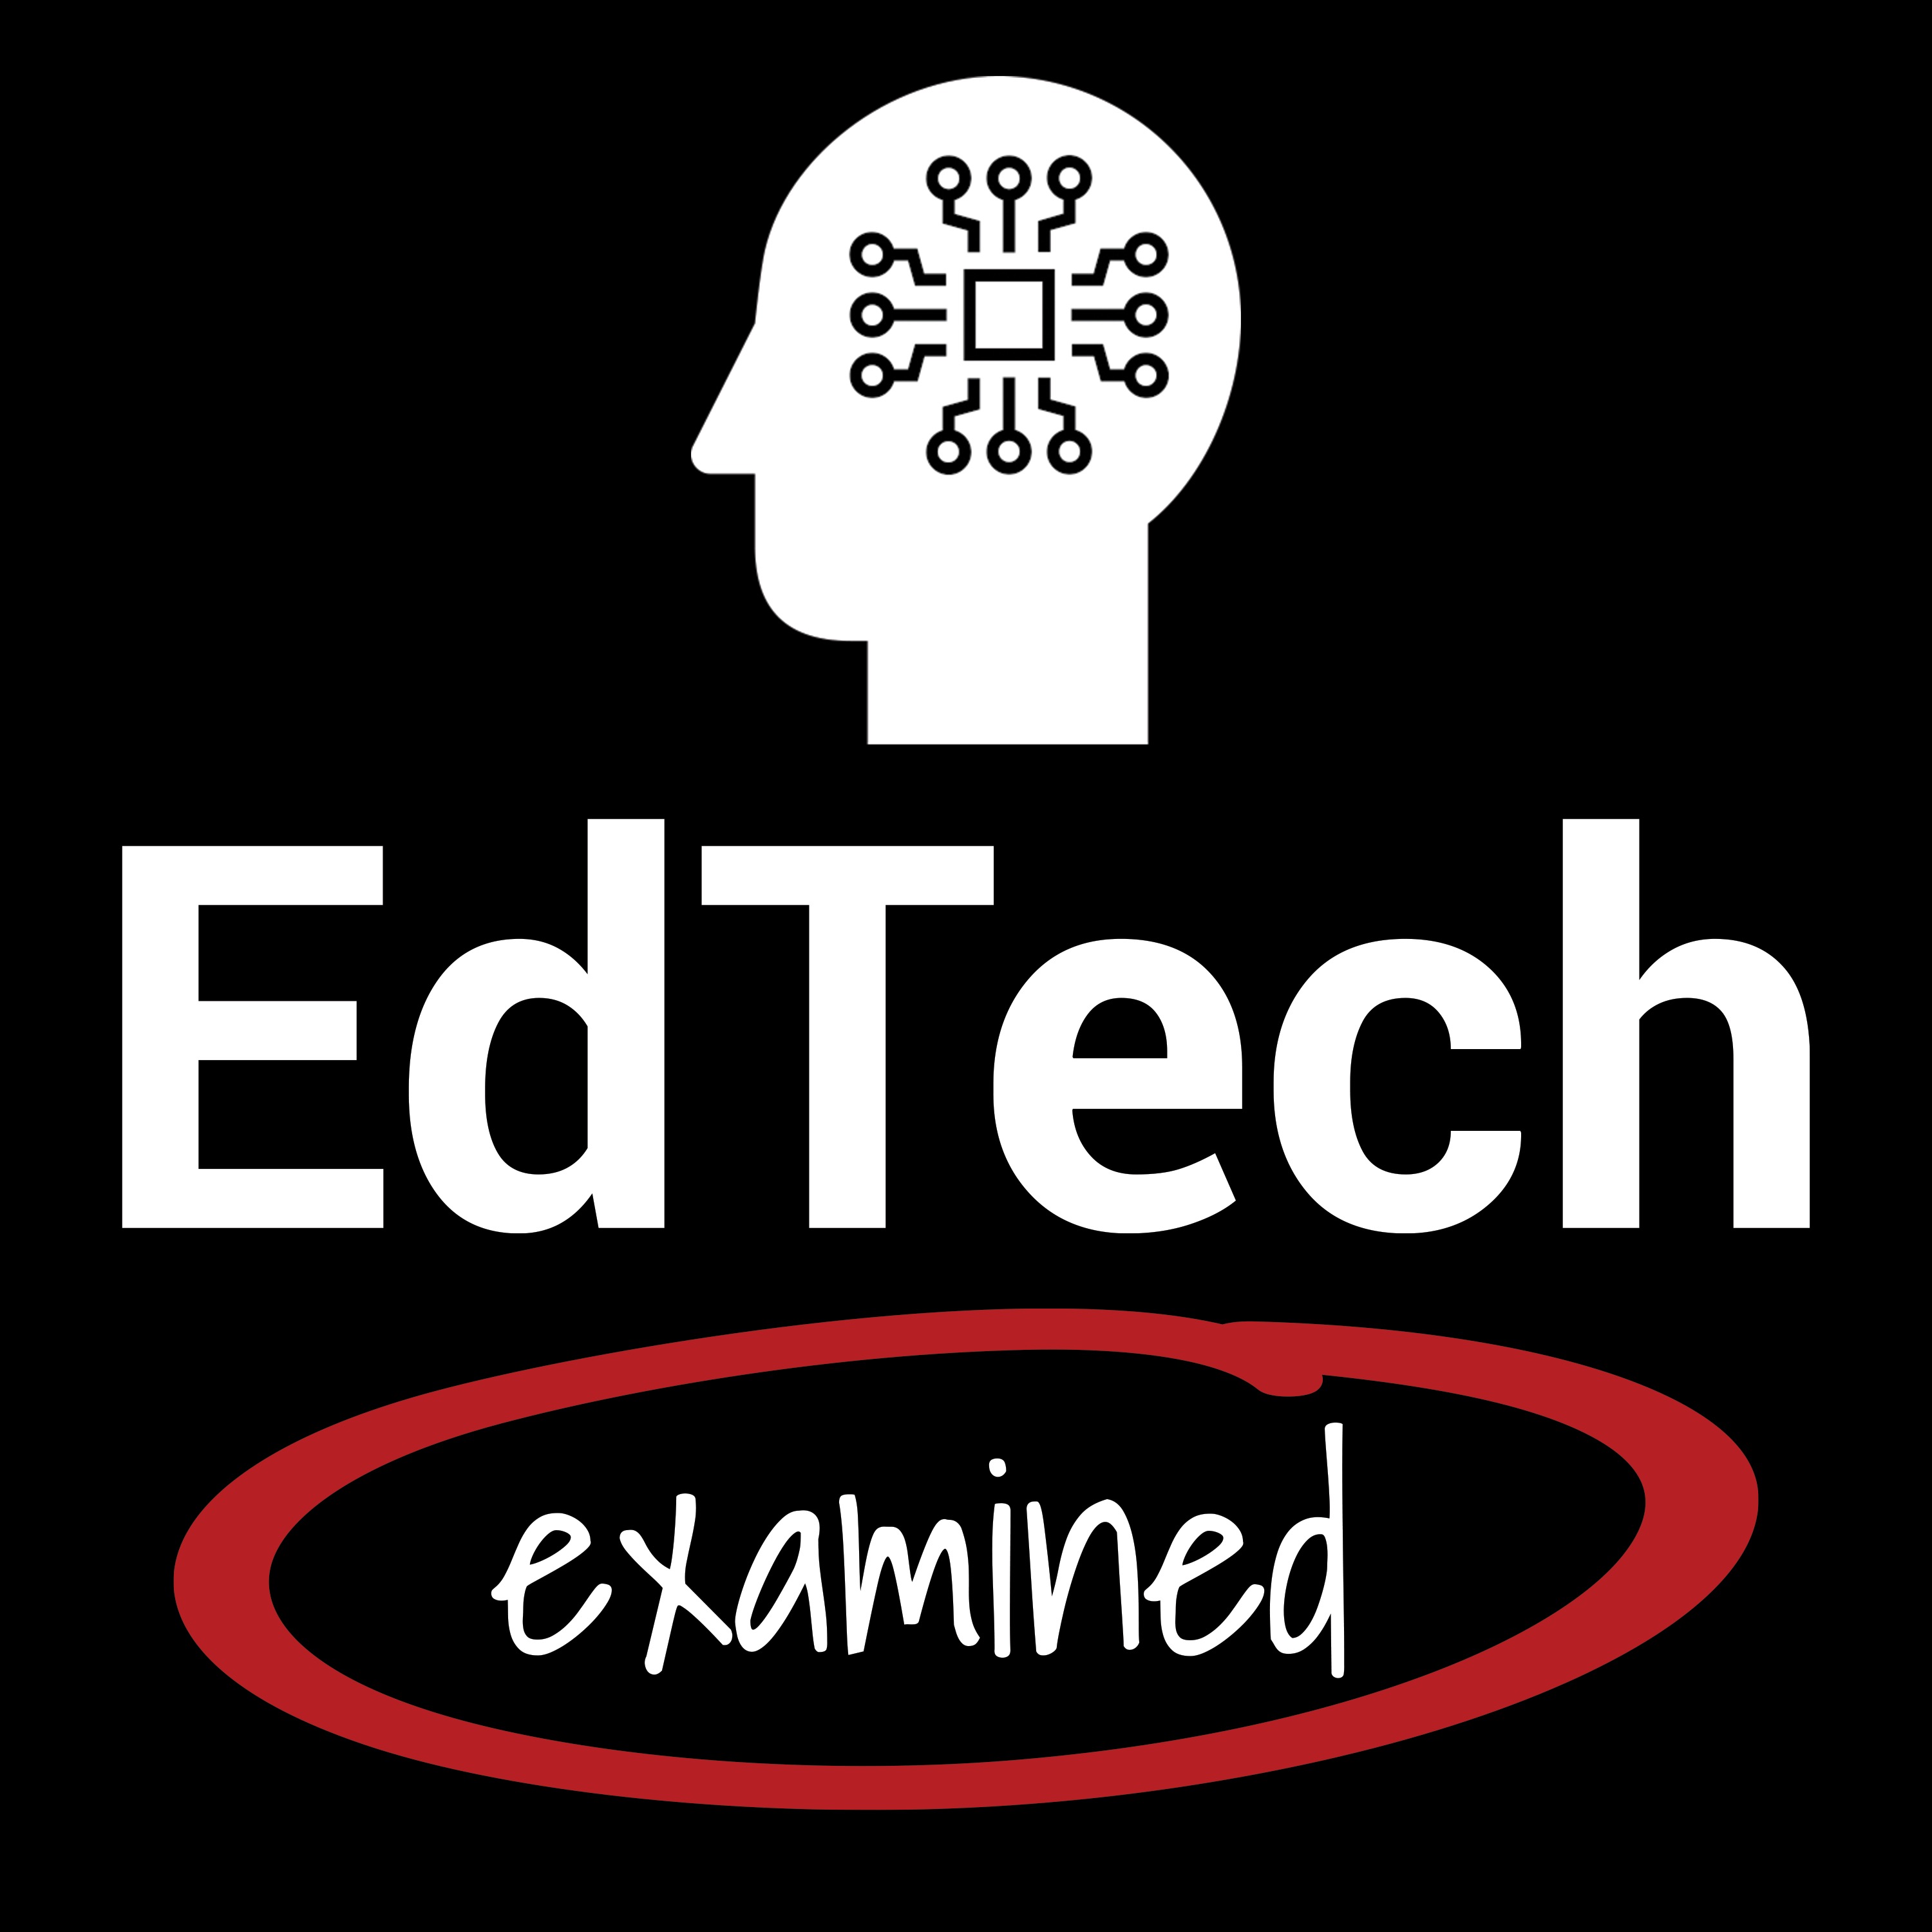 Trailer: Introducing EdTech Examined